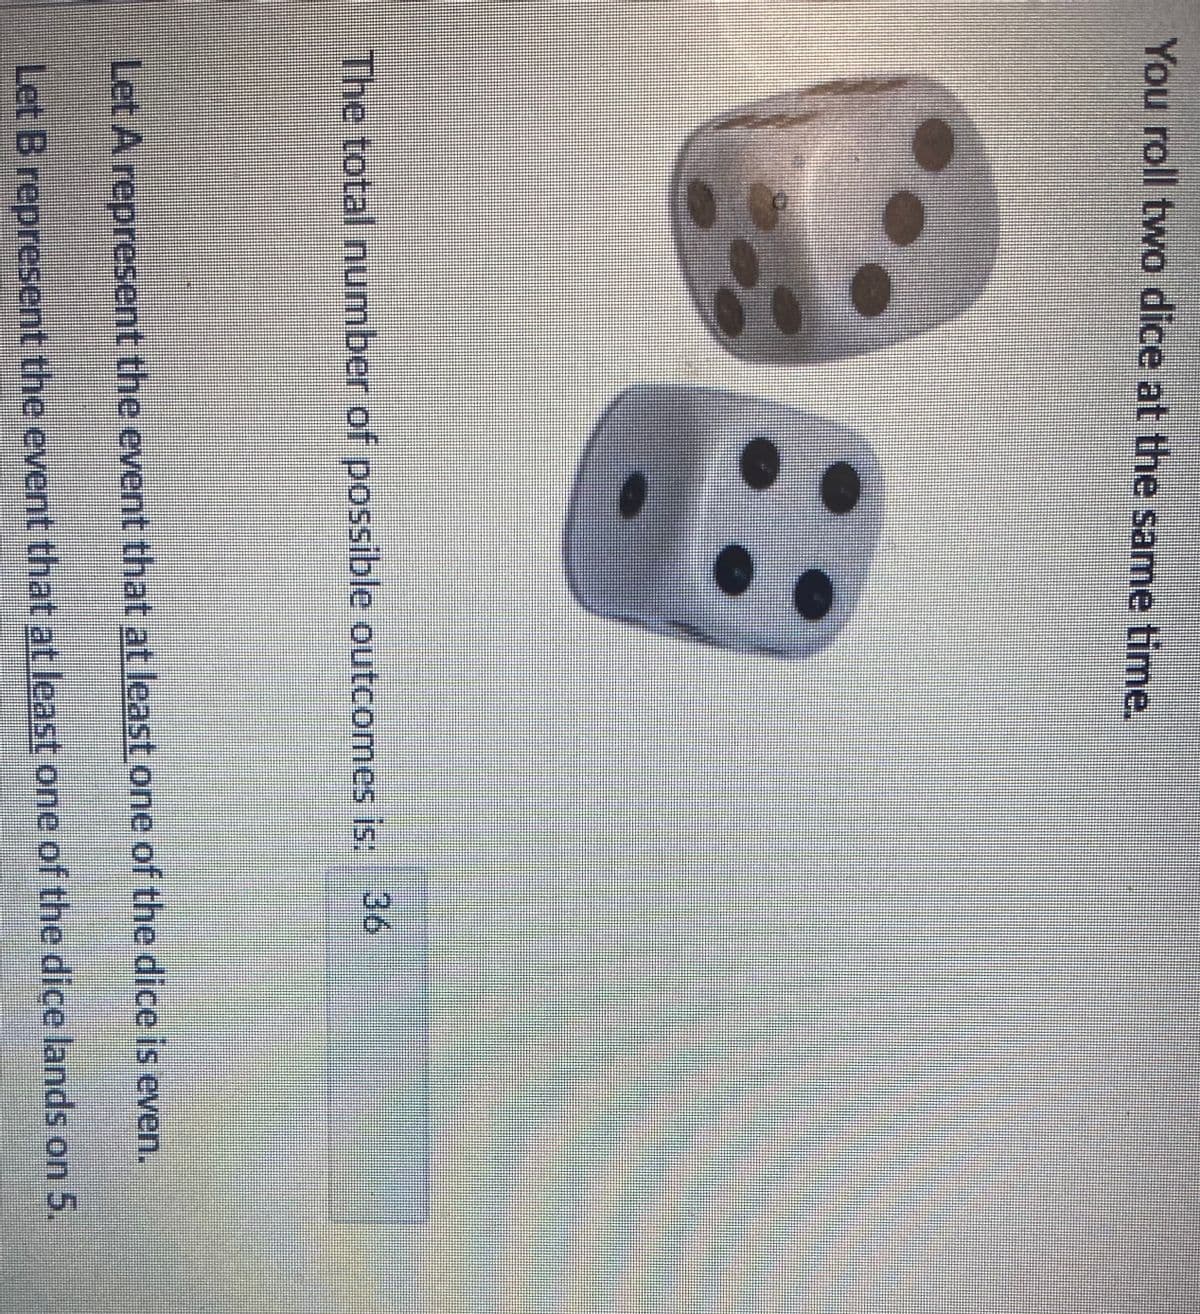 You roll two dice at the same time.
The total number of possible outcomes is: 36
Let A represent the event that at least one of the dice is even.
Let B represent the event that at least one of the dice lands on 5.